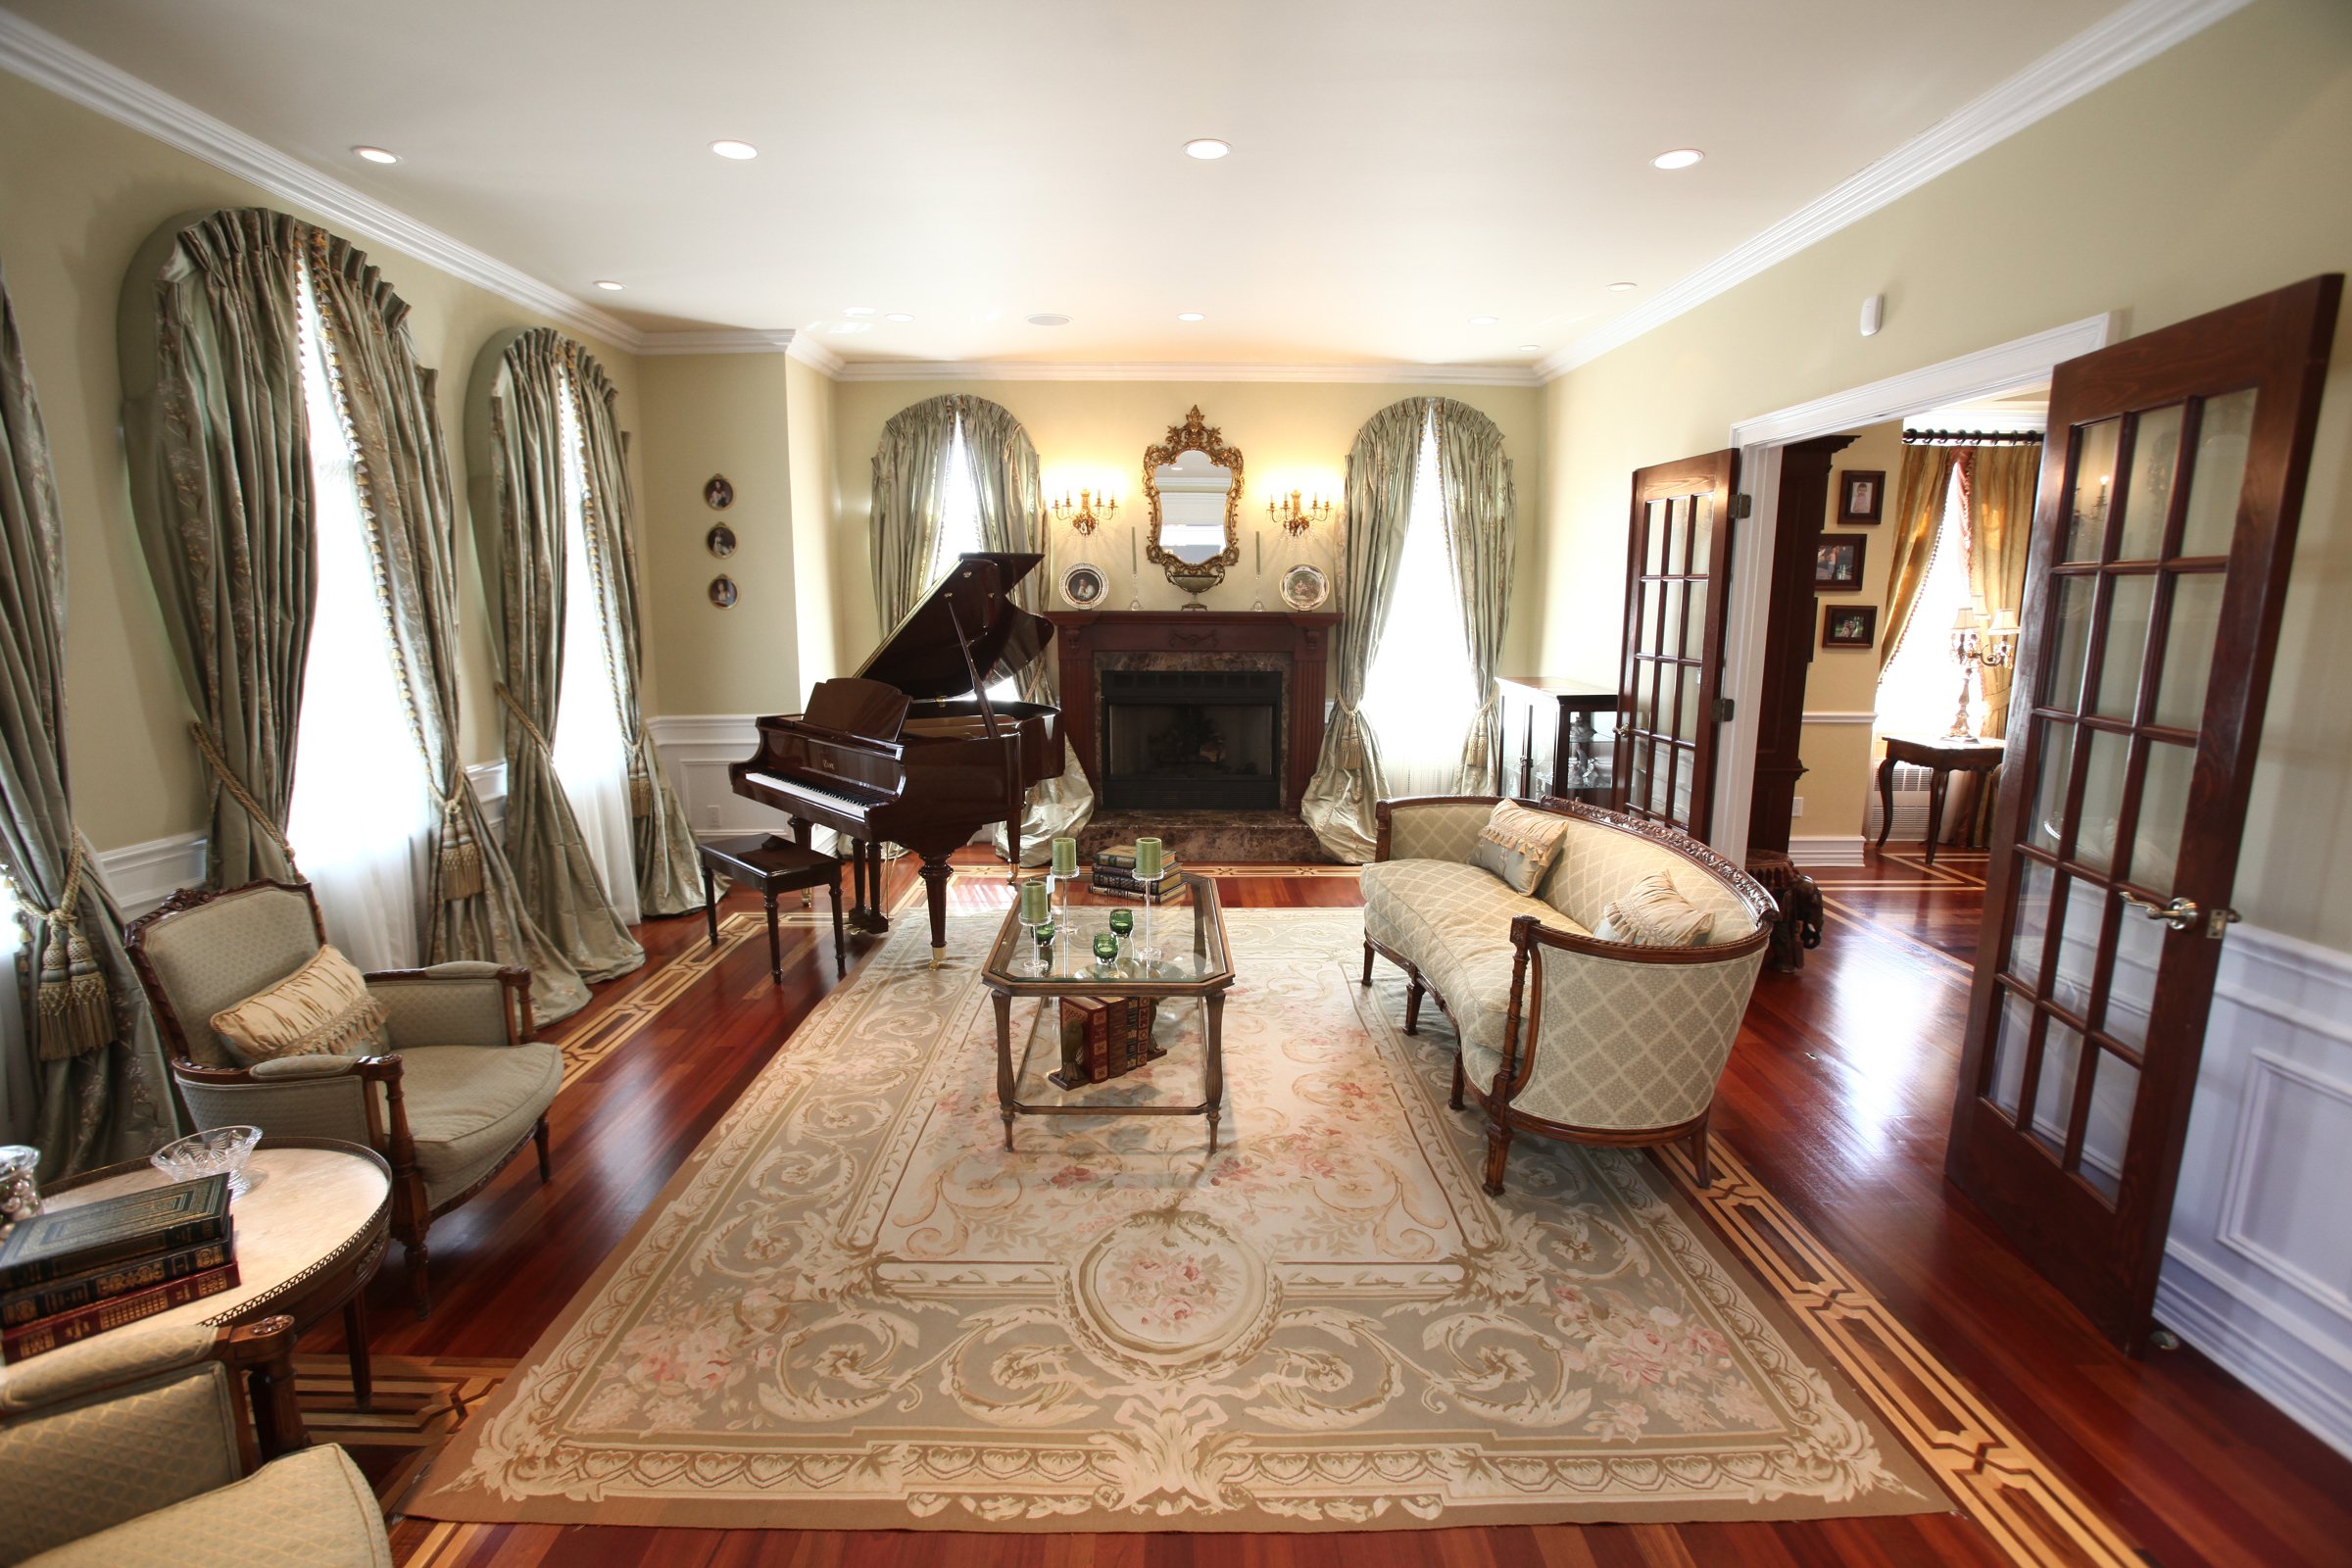  This home at 5 Center Drive in Malba Queens was built from the ground up in 2002. The living room includes a grand piano. 